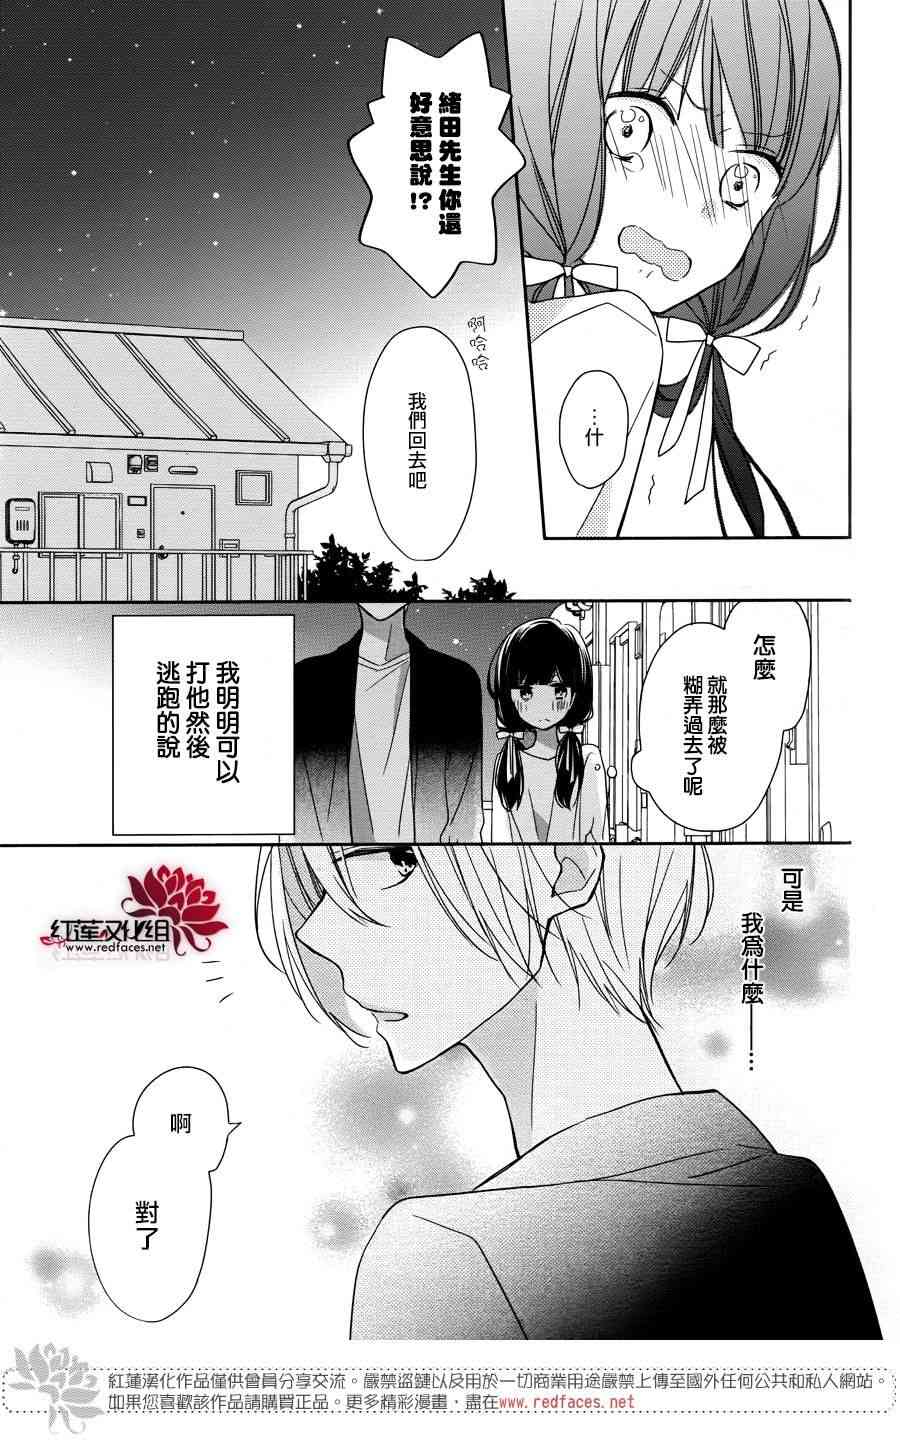 If given a second chance - 2話 - 5